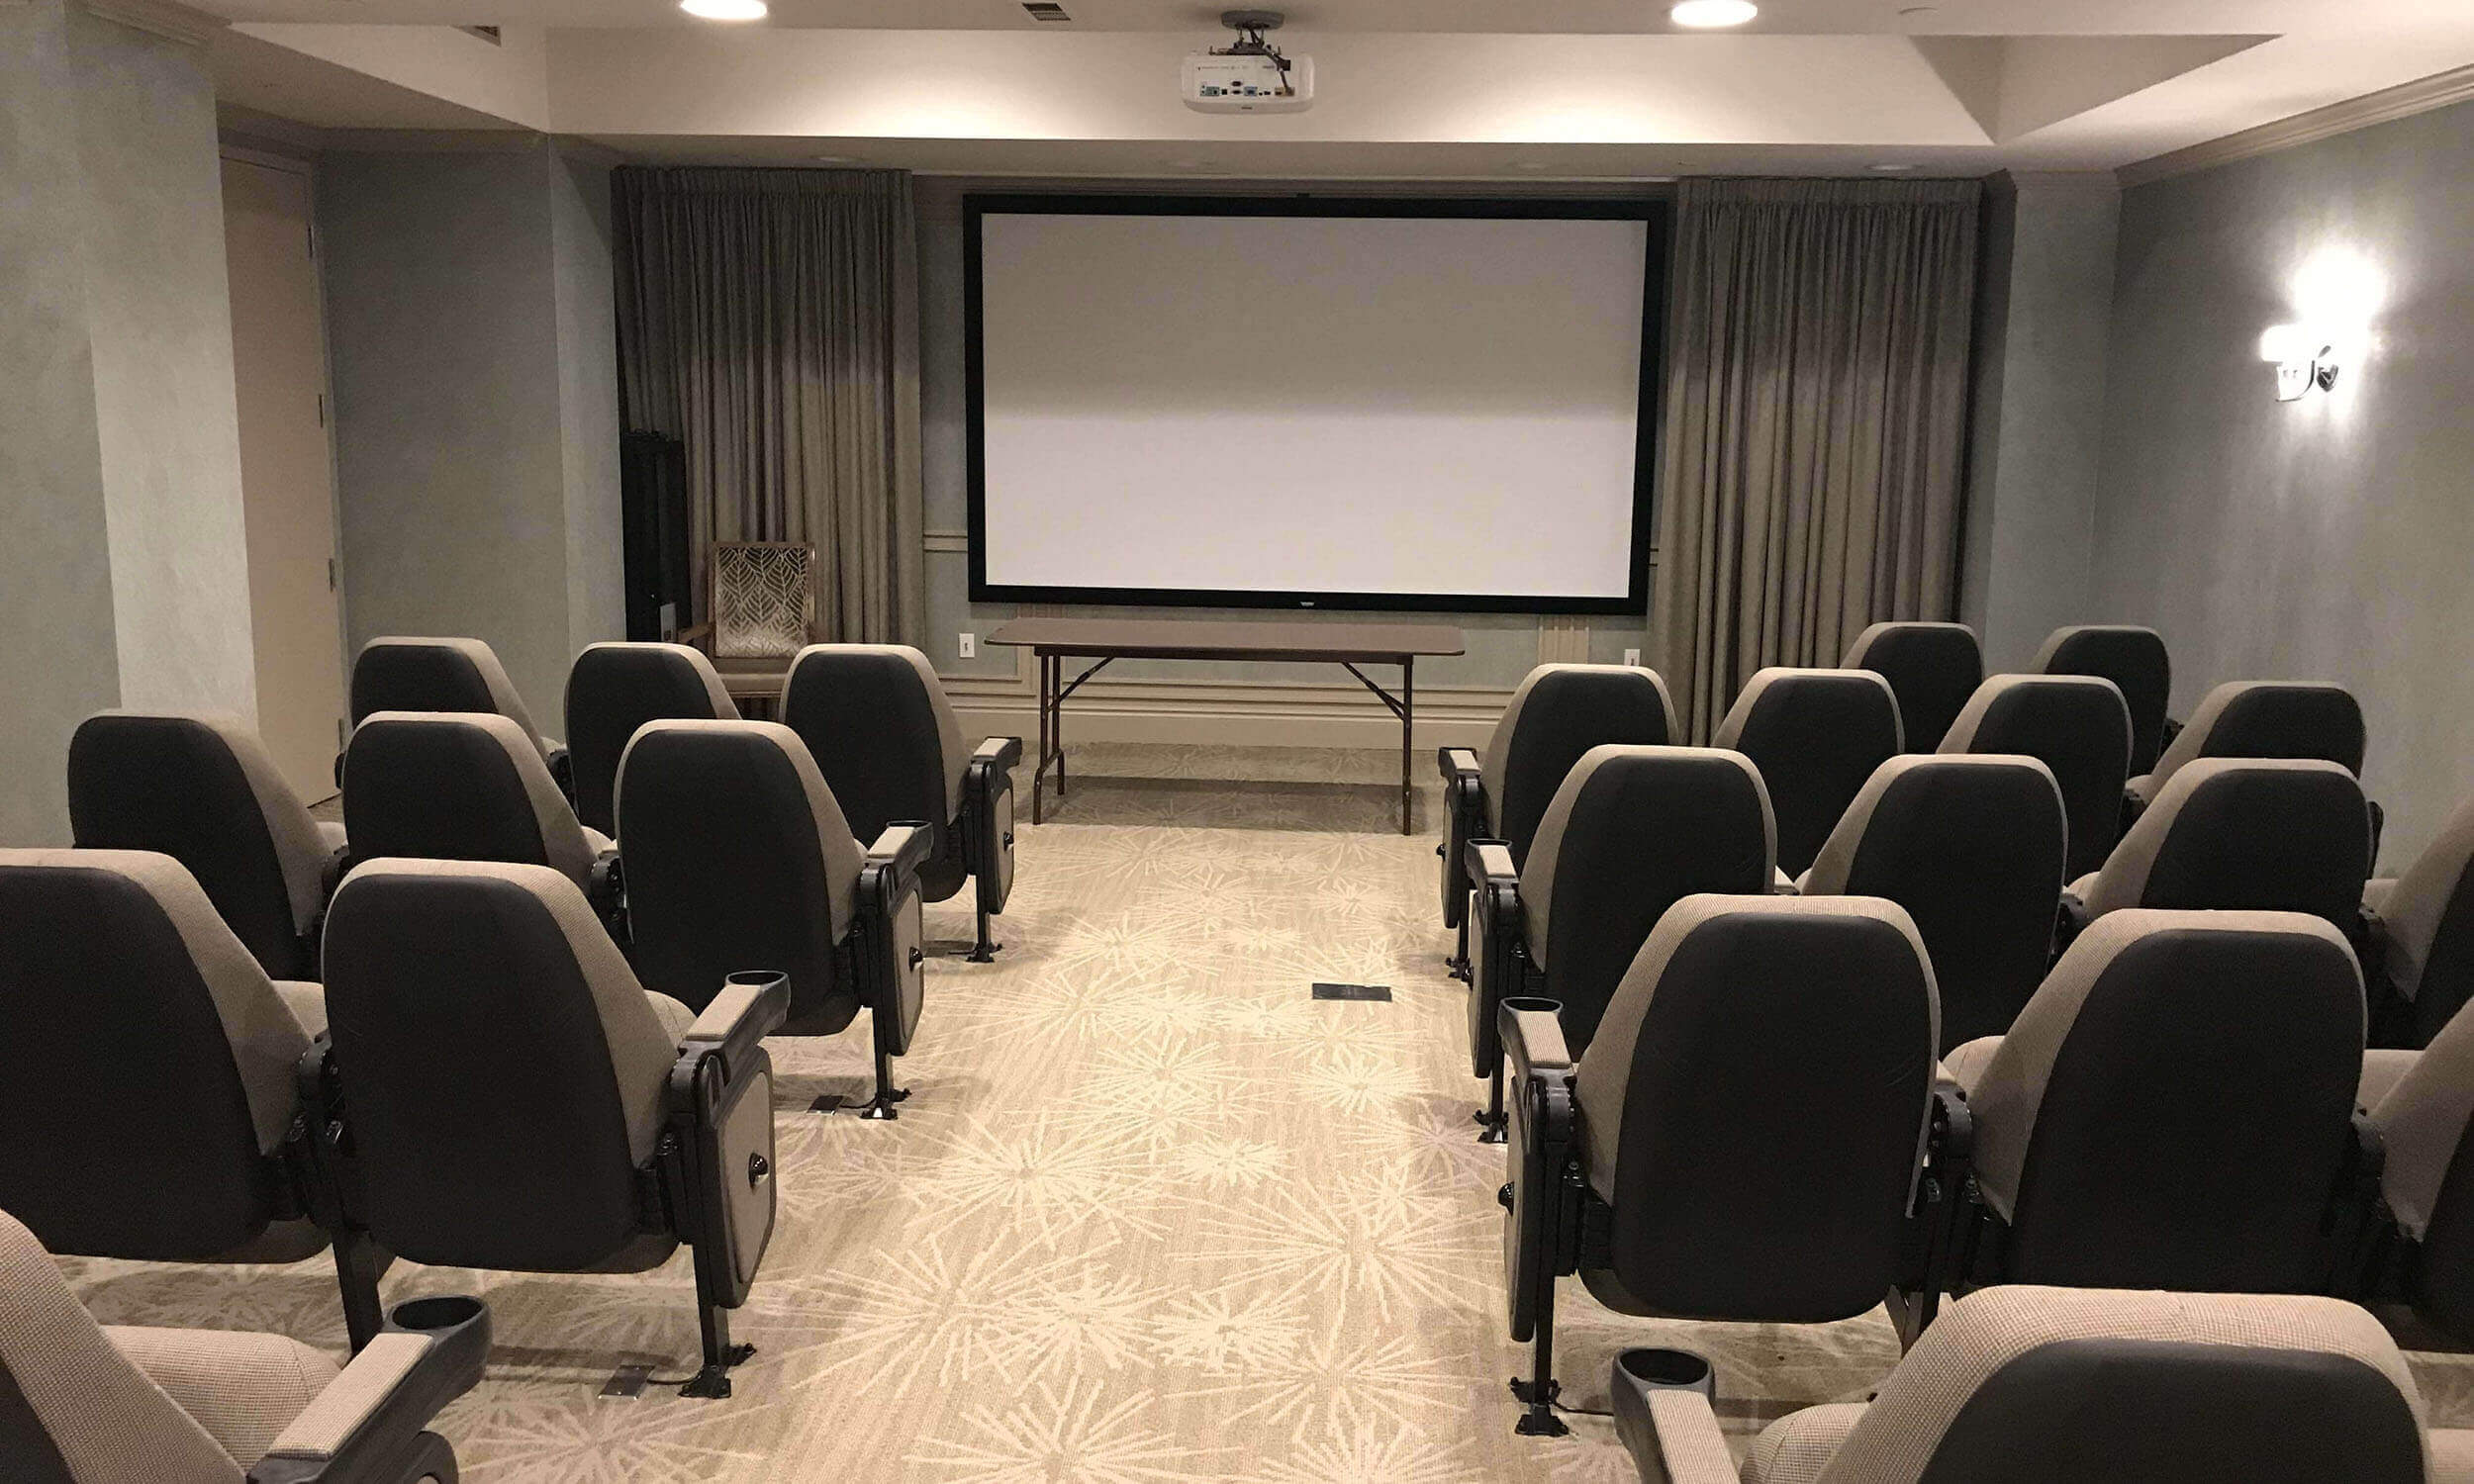 Entertainment room of retirement home with large movie screen and rows of seating